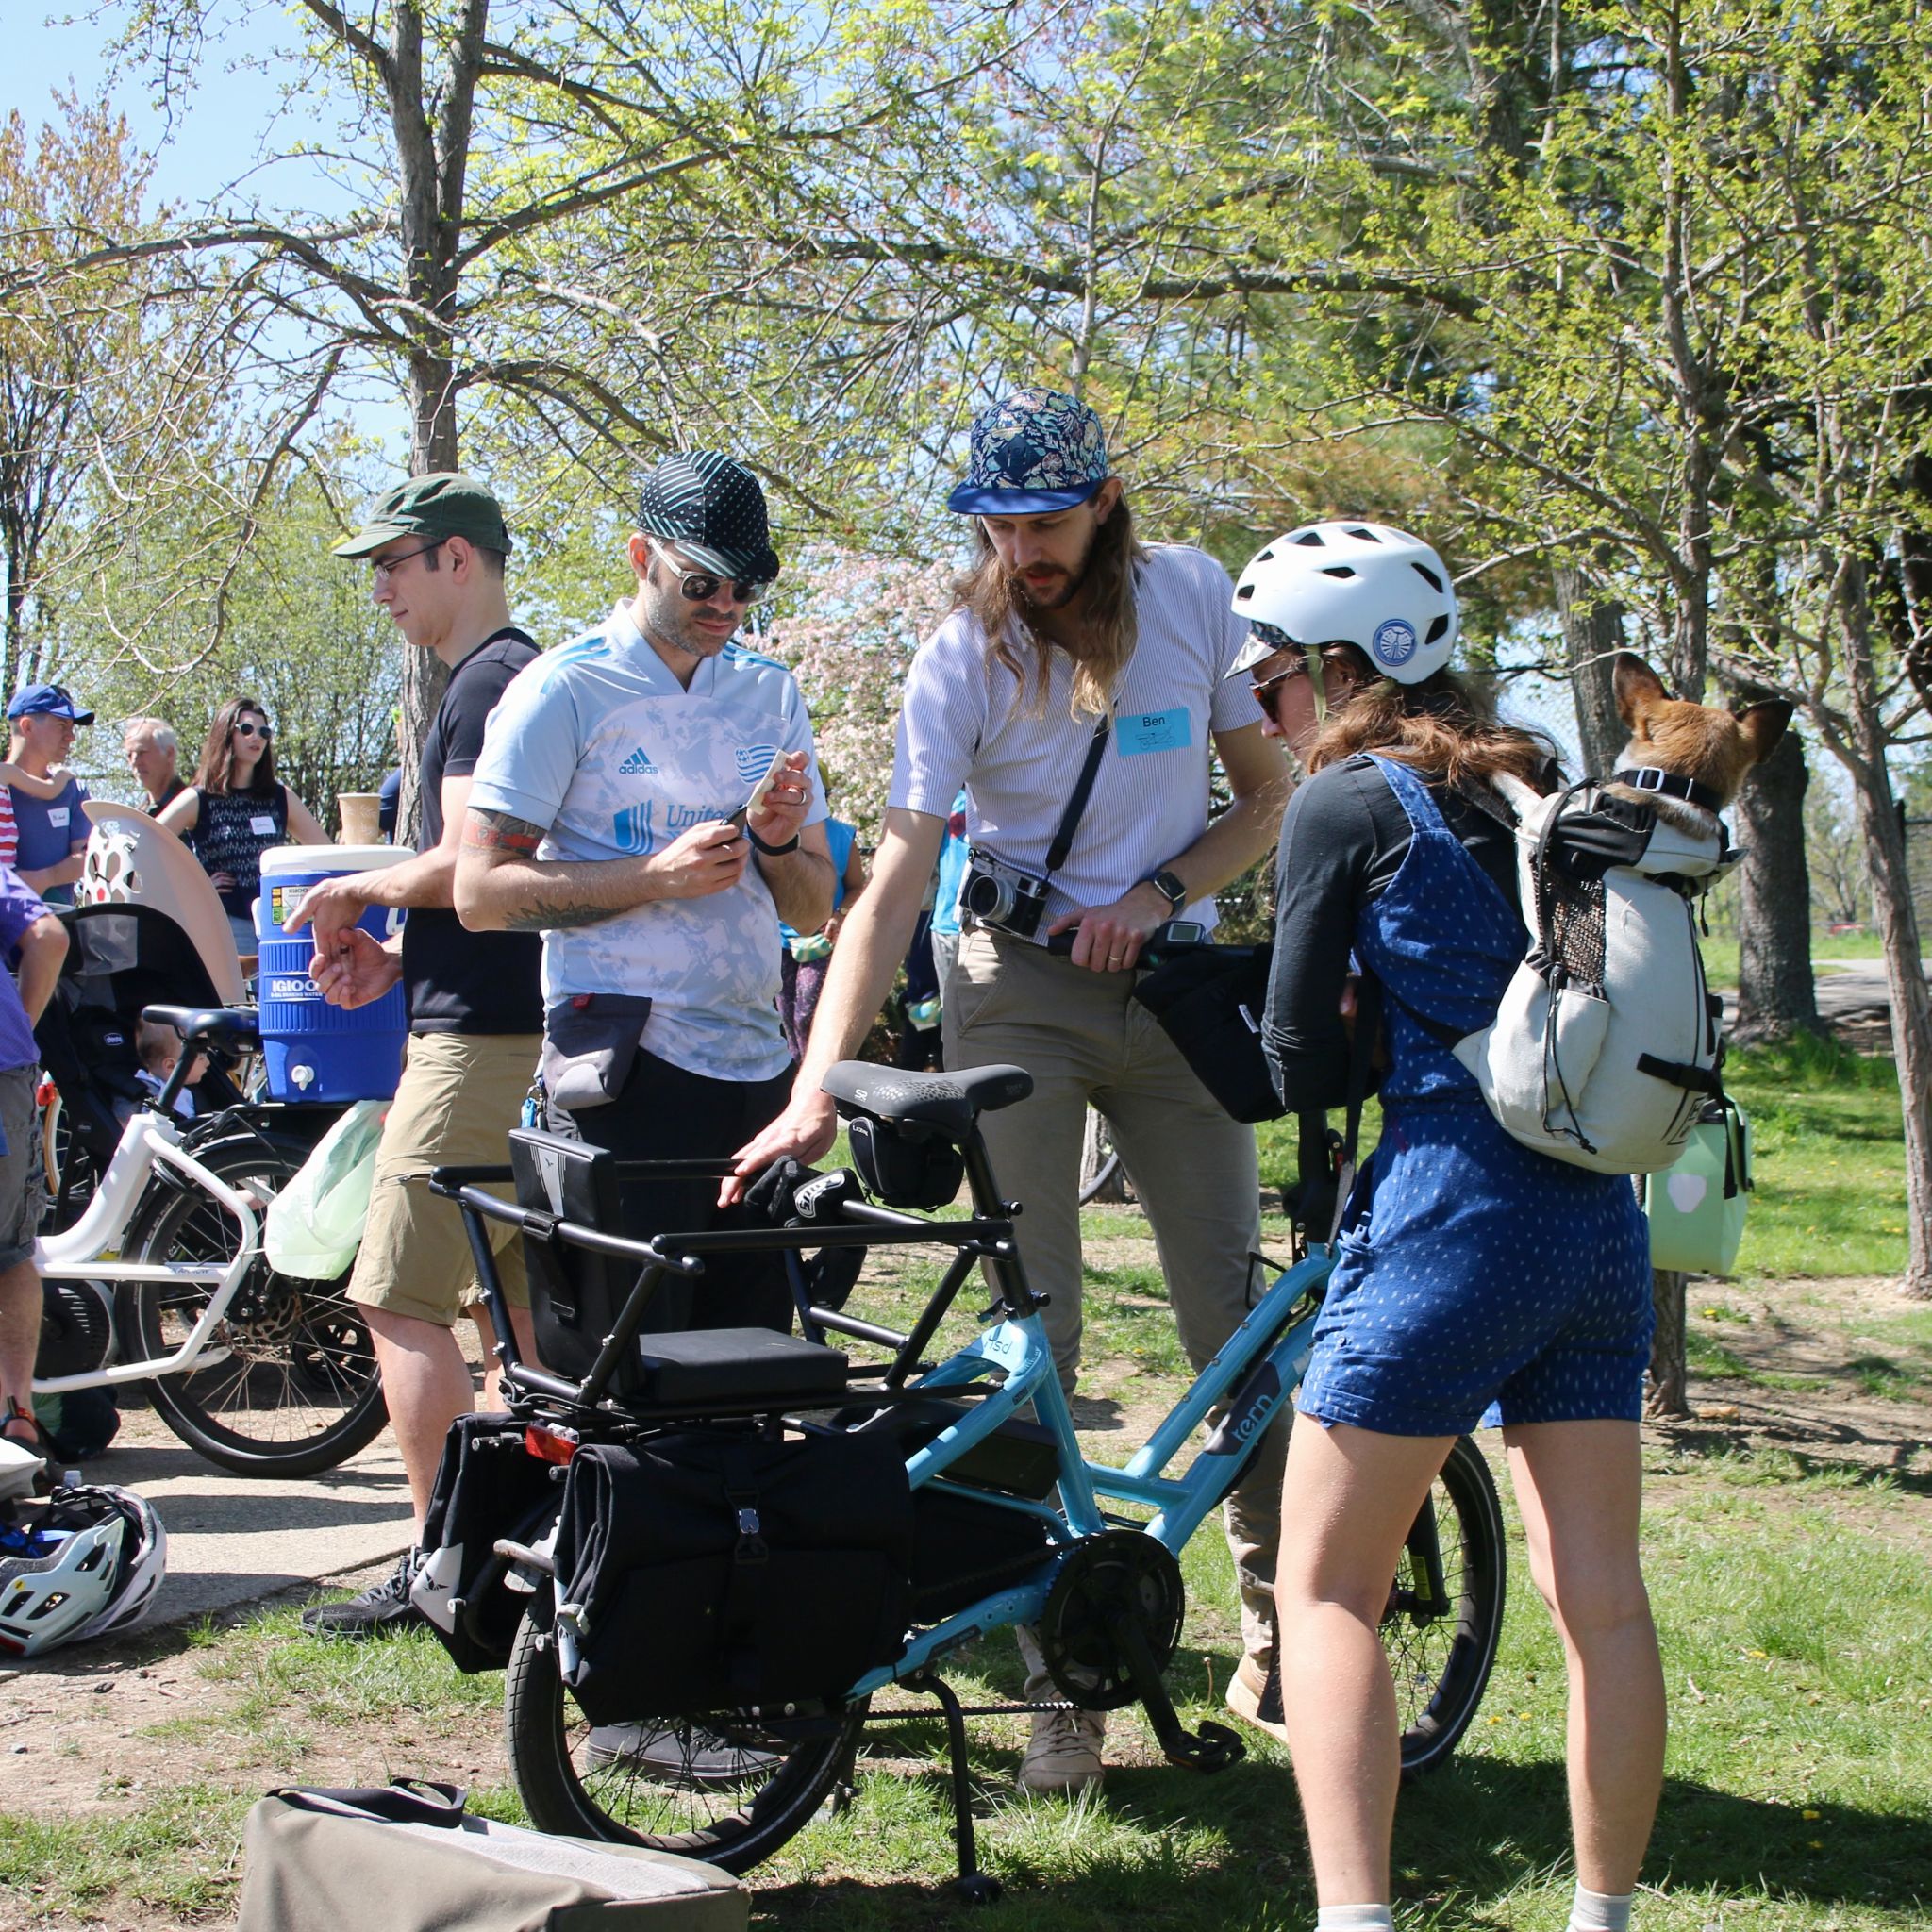 a group of people gathered around bicycles in a park setting on a sunny day. Some are engaged in conversation while checking out a blue cargo bike. One individual is holding a smartphone, and another has a dog peeking out from a backpack.